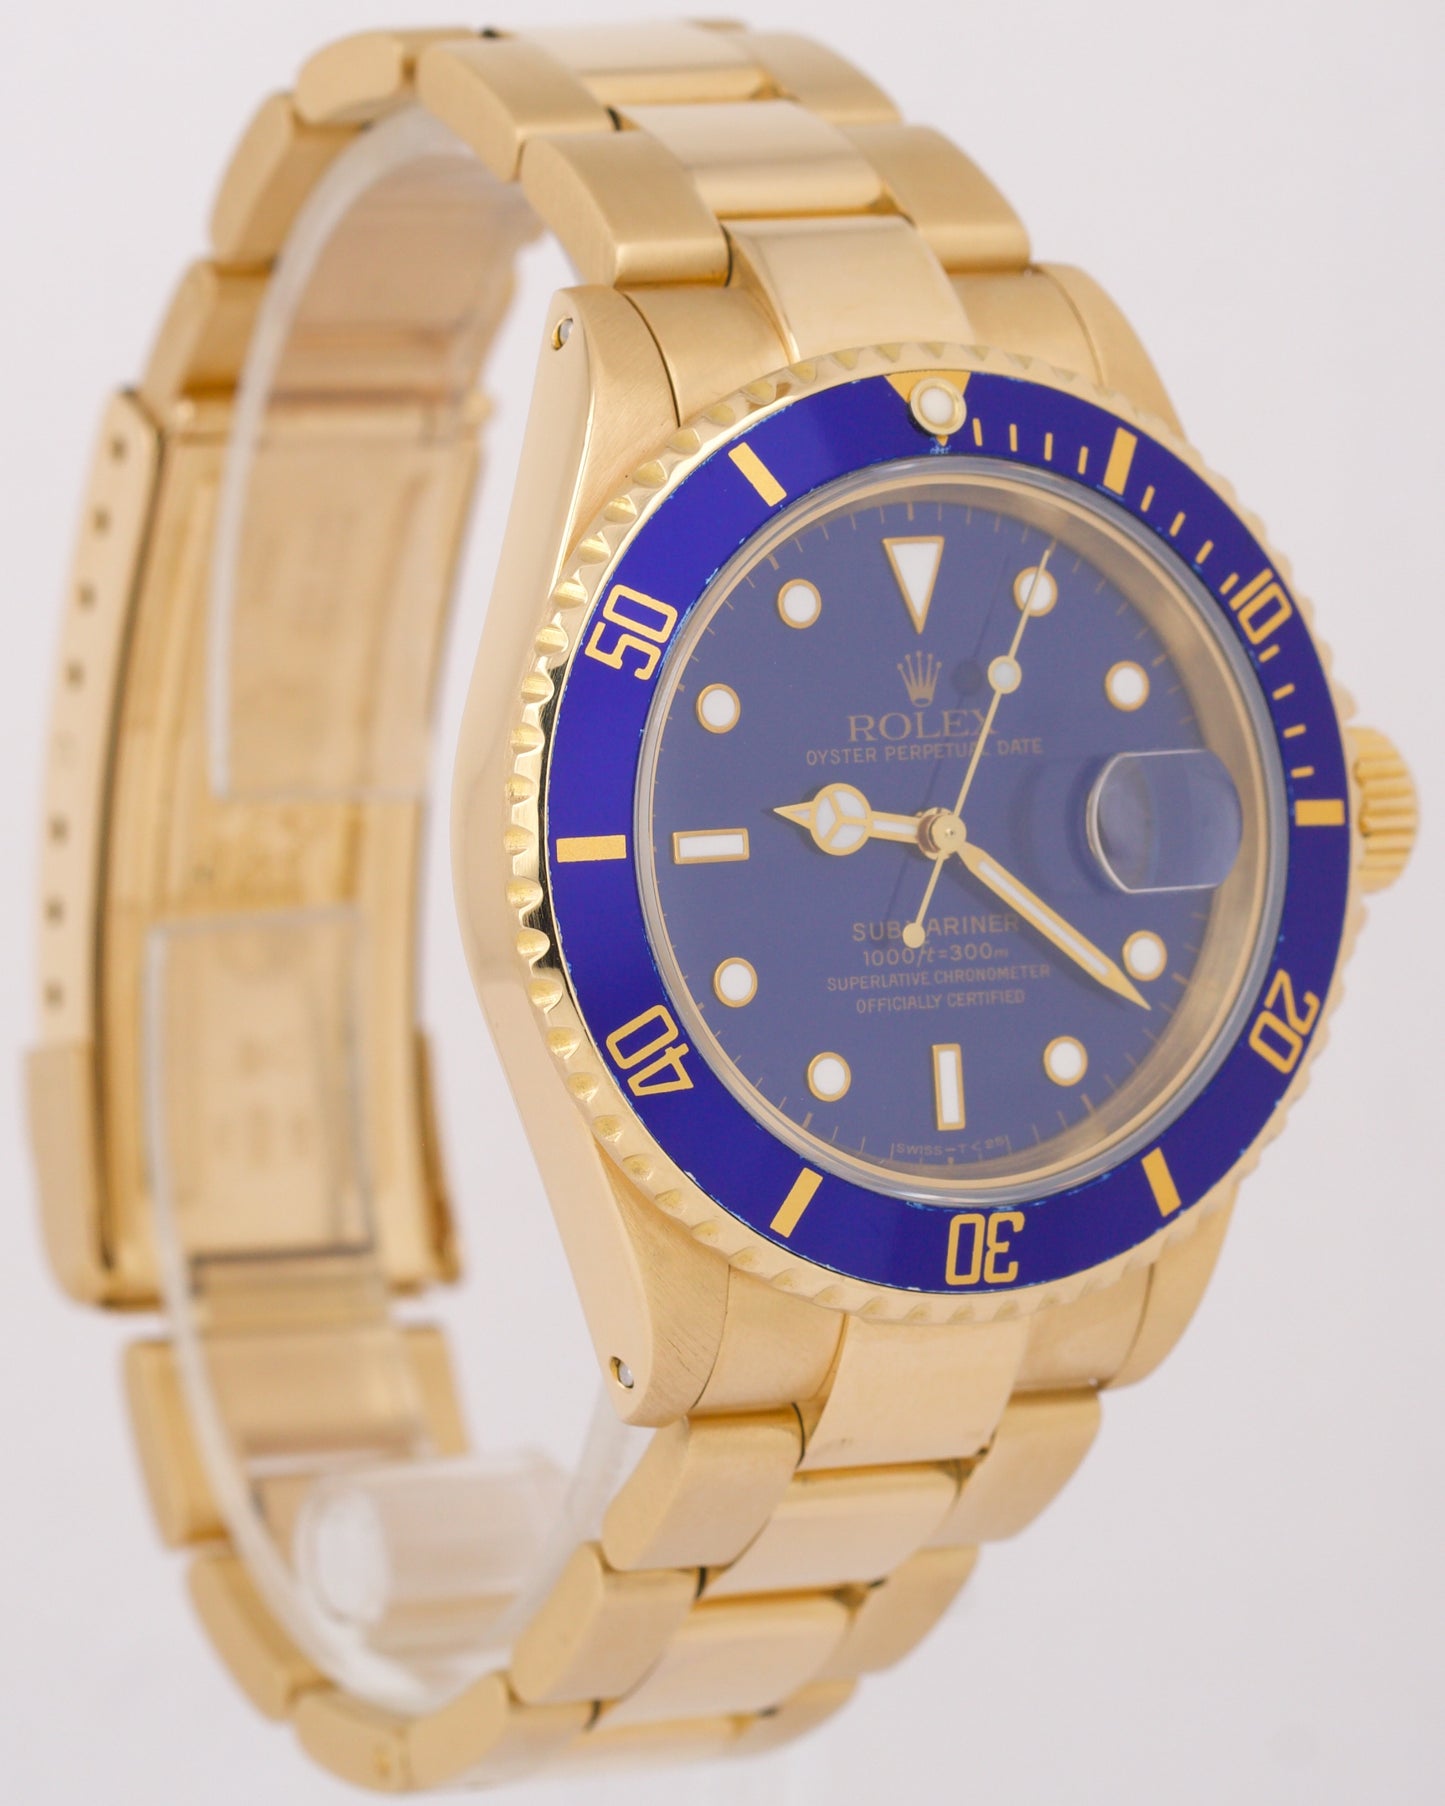 Rolex Submariner Date 18K Yellow Gold BLUE 40mm Automatic Oyster Watch 16618 LB